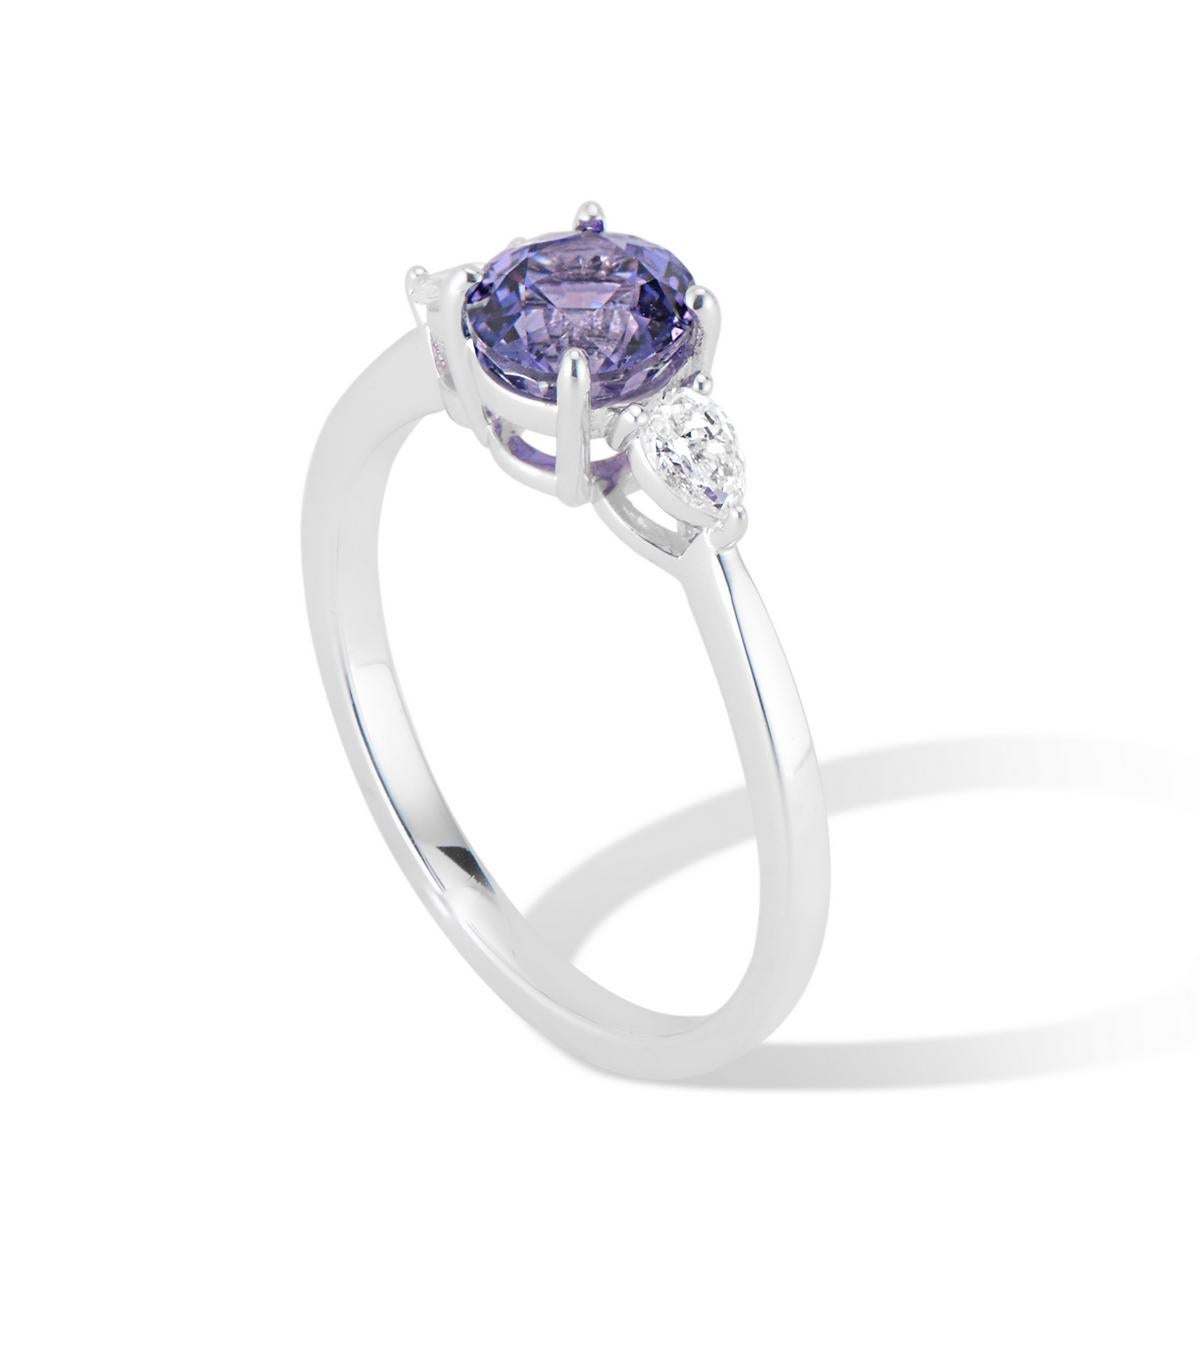 A stunning unheated 1.11 carat unheated Purple Madagascar Sapphire center stone flanked by two scintillating Pear Shaped diamonds in a low profile 18k white gold setting. 
Three stone Engagement rings are enjoying a huge moment of popularity